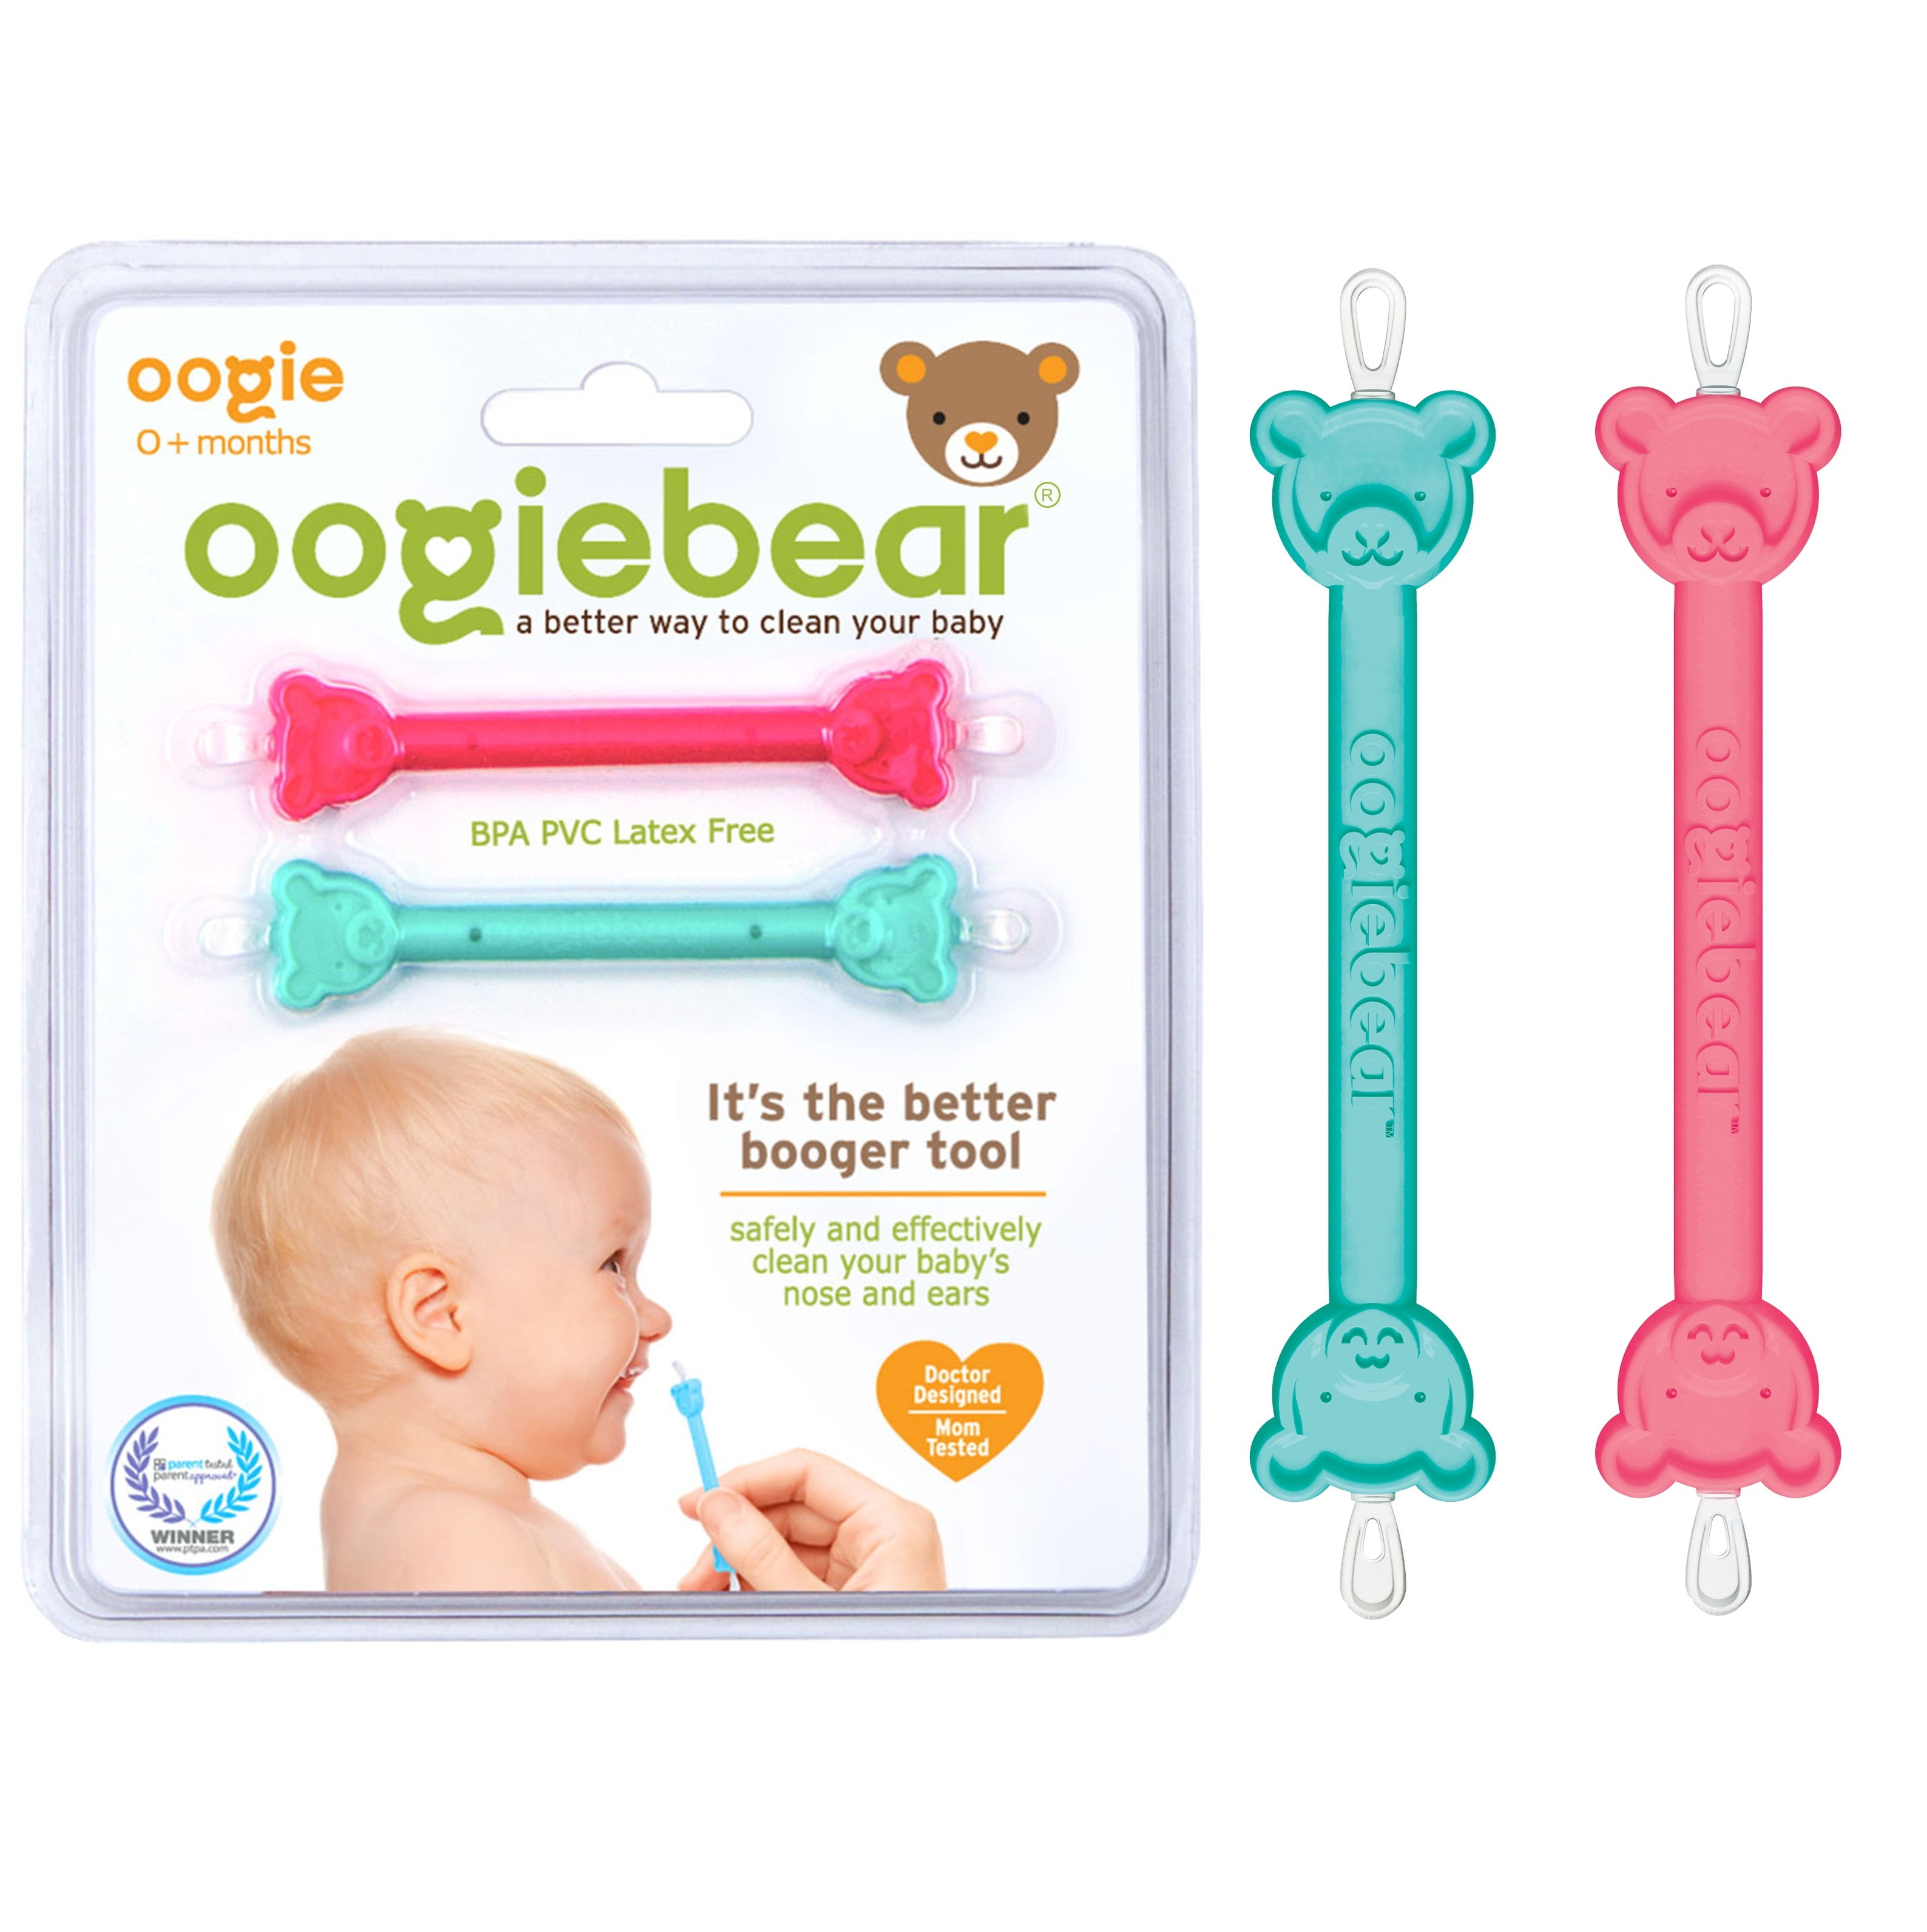 1oz nosebalm Ointment for Healing Baby’s Nose Face & Delicate Skin Cheeks Oogie Bundle Snot and Ear Cleaner Tool USDA Certified and oogiebear Orange Seafoam Two Pack Baby Nasal Booger 